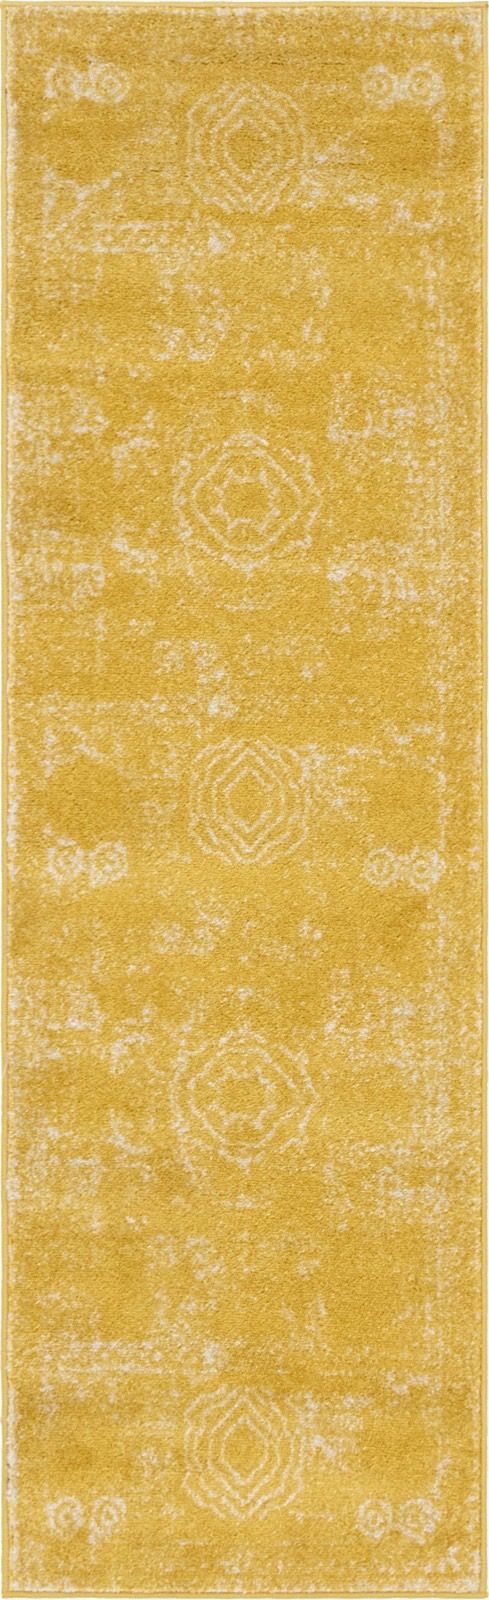 rugpal vienna traditional area rug collection